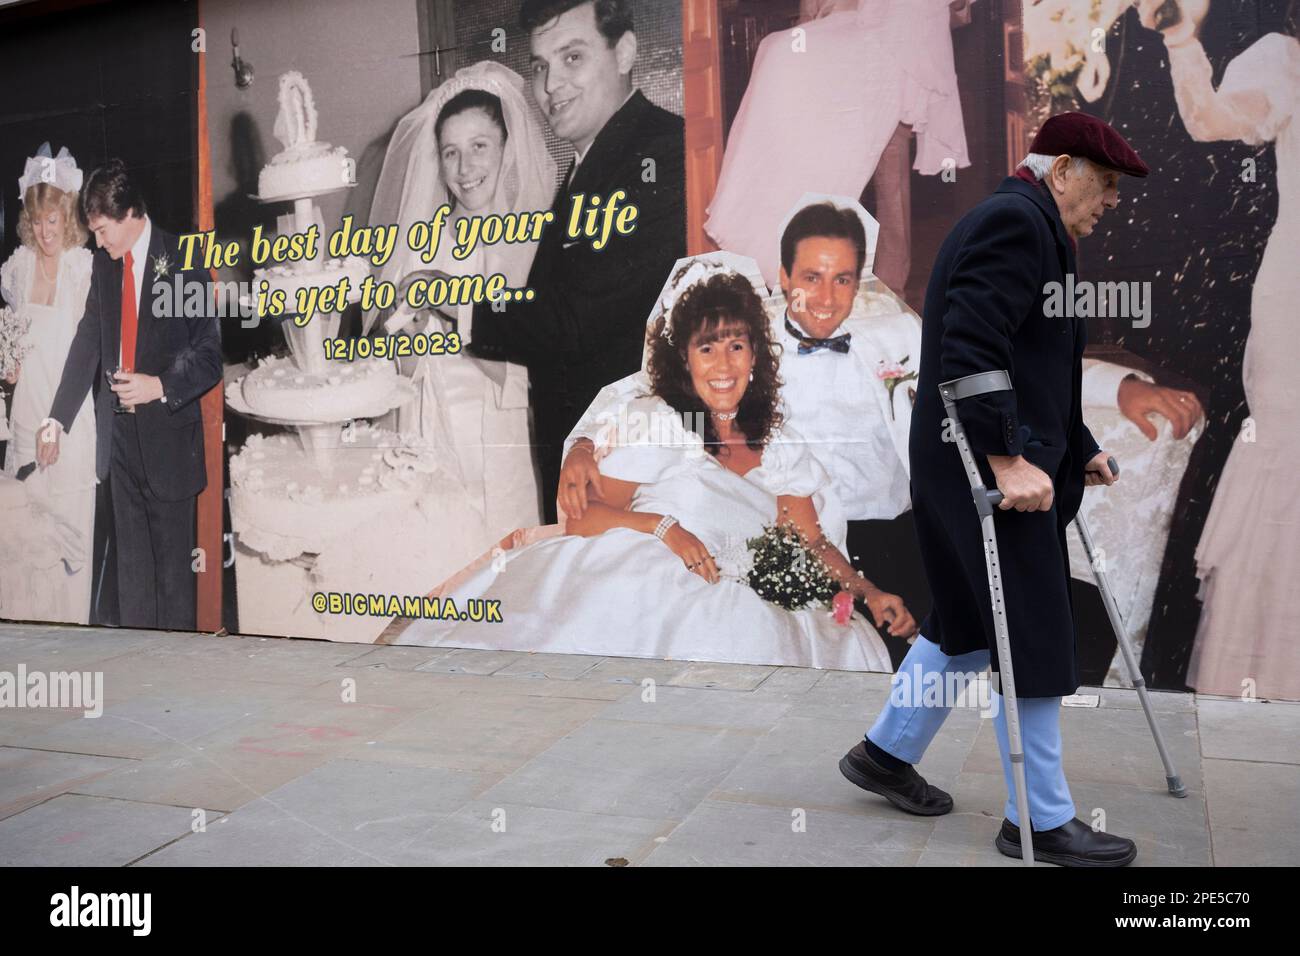 A disabled man walks with the help of crutches past a retail hoarding featuring a young bride and groom couple celebrating their wedding day, a picture of loyalty, dedication from youth to pension age, on 13th March 2023, in London, England. Stock Photo